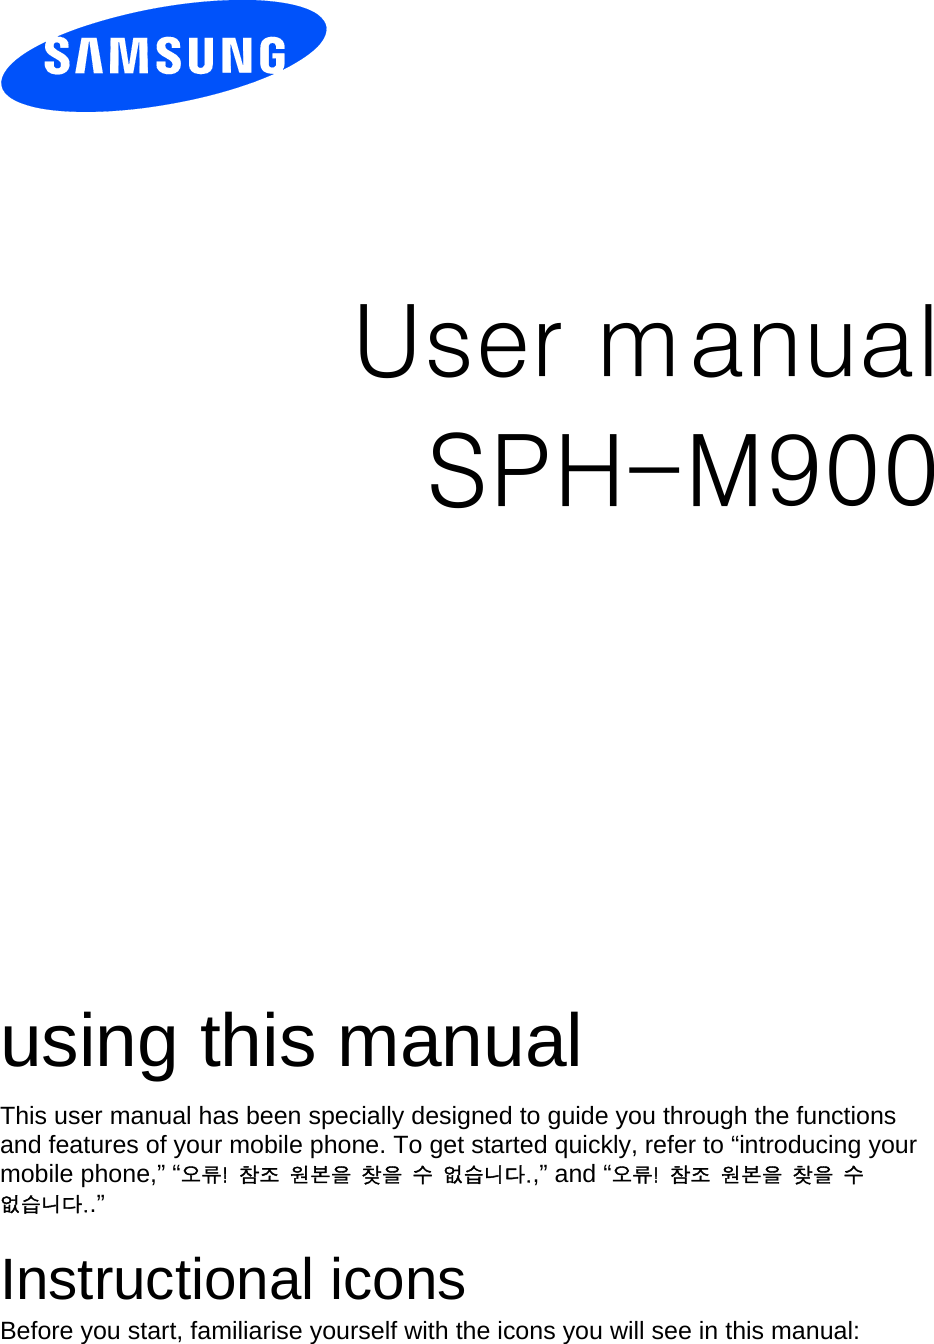            User manual SPH-M900                  using this manual This user manual has been specially designed to guide you through the functions and features of your mobile phone. To get started quickly, refer to “introducing your mobile phone,” “오류!  참조  원본을  찾을  수  없습니다.,” and “오류!  참조  원본을  찾을  수 없습니다..”  Instructional icons Before you start, familiarise yourself with the icons you will see in this manual:   